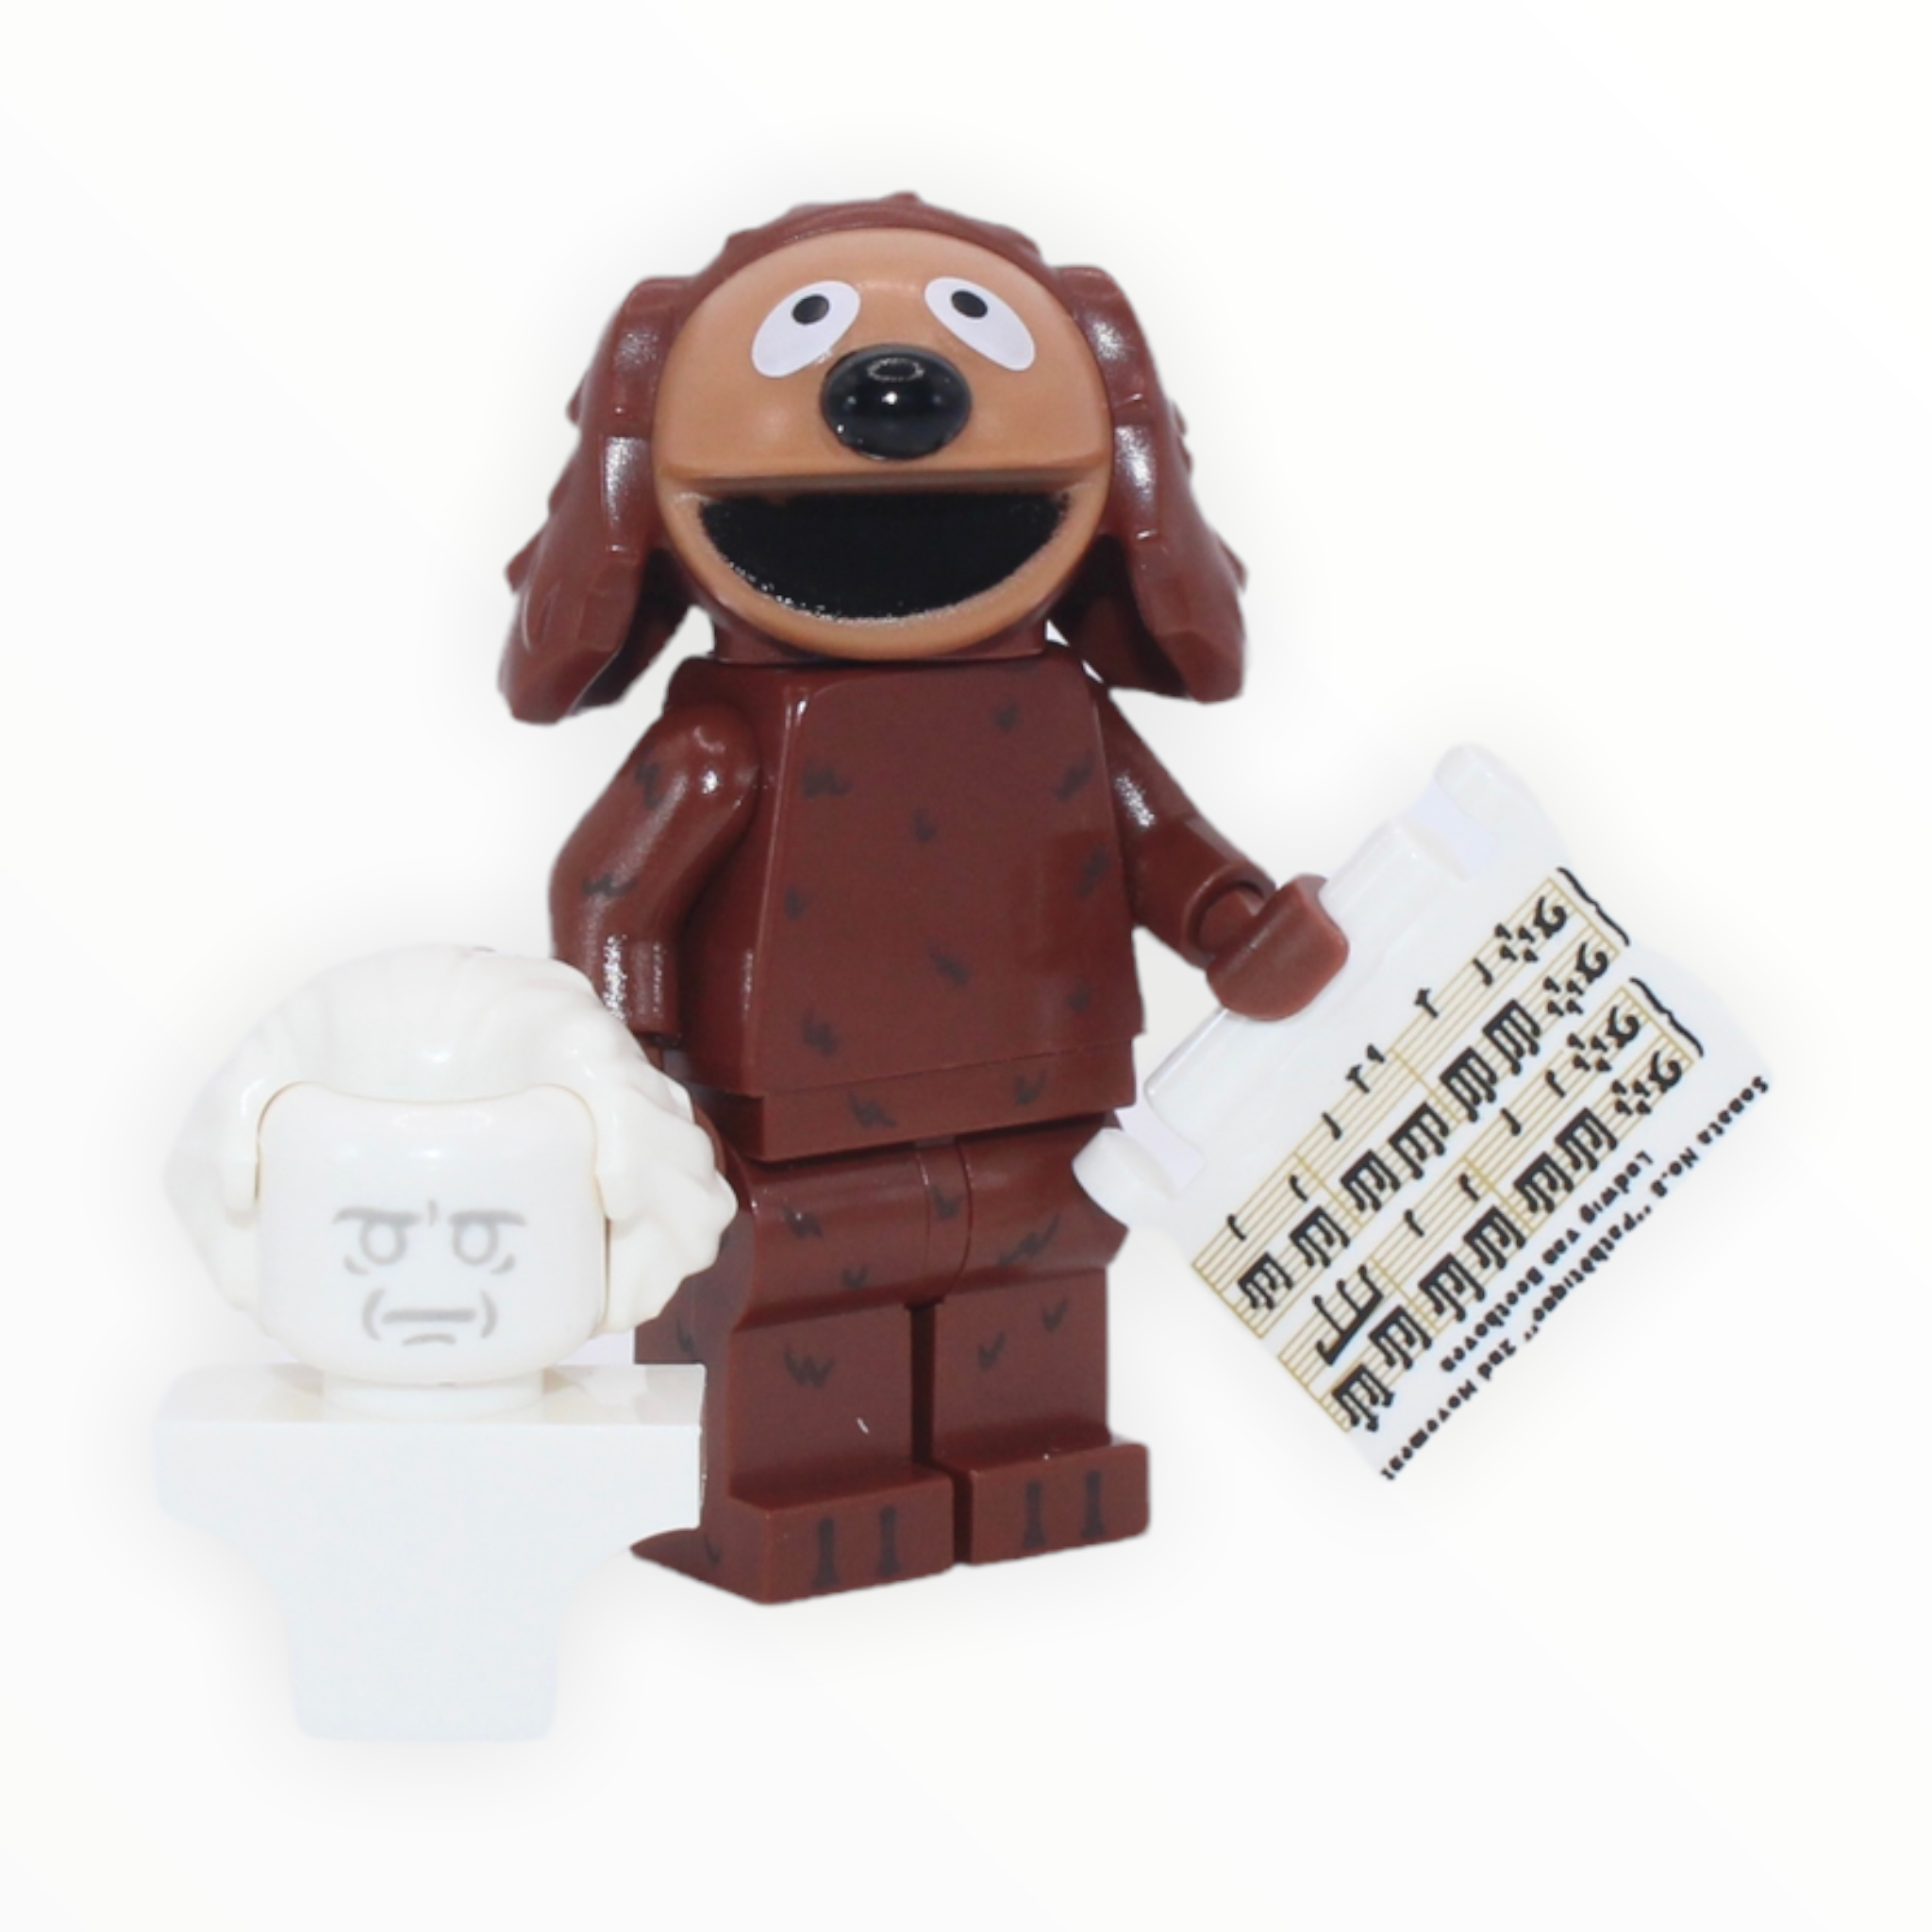 The Muppets Series: Rowlf the Dog